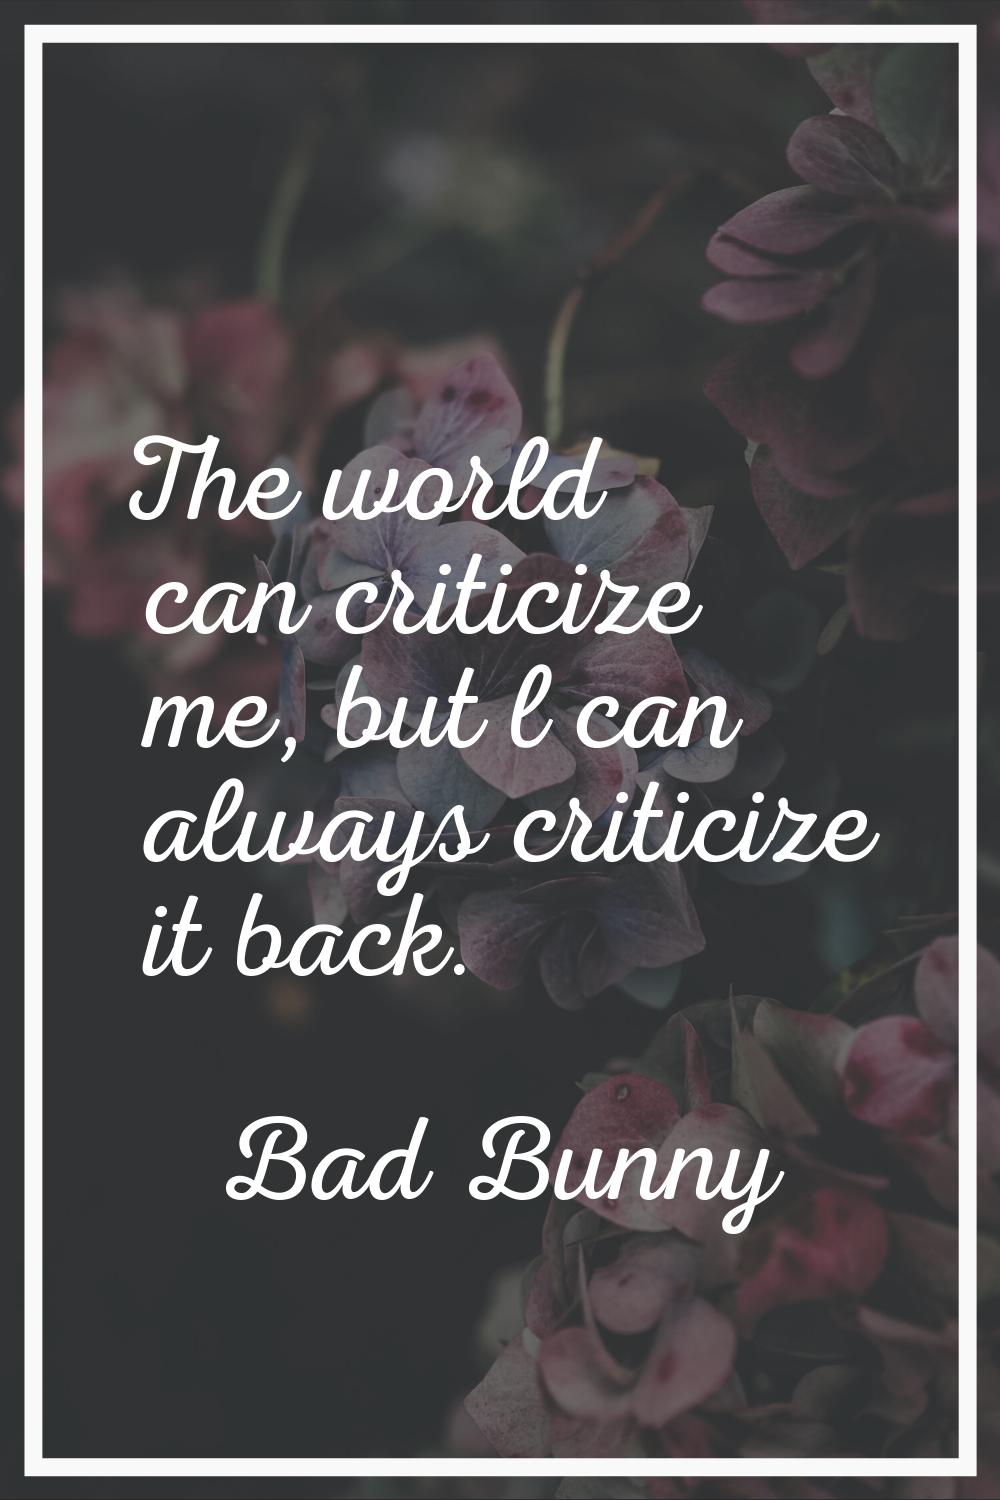 The world can criticize me, but l can always criticize it back.